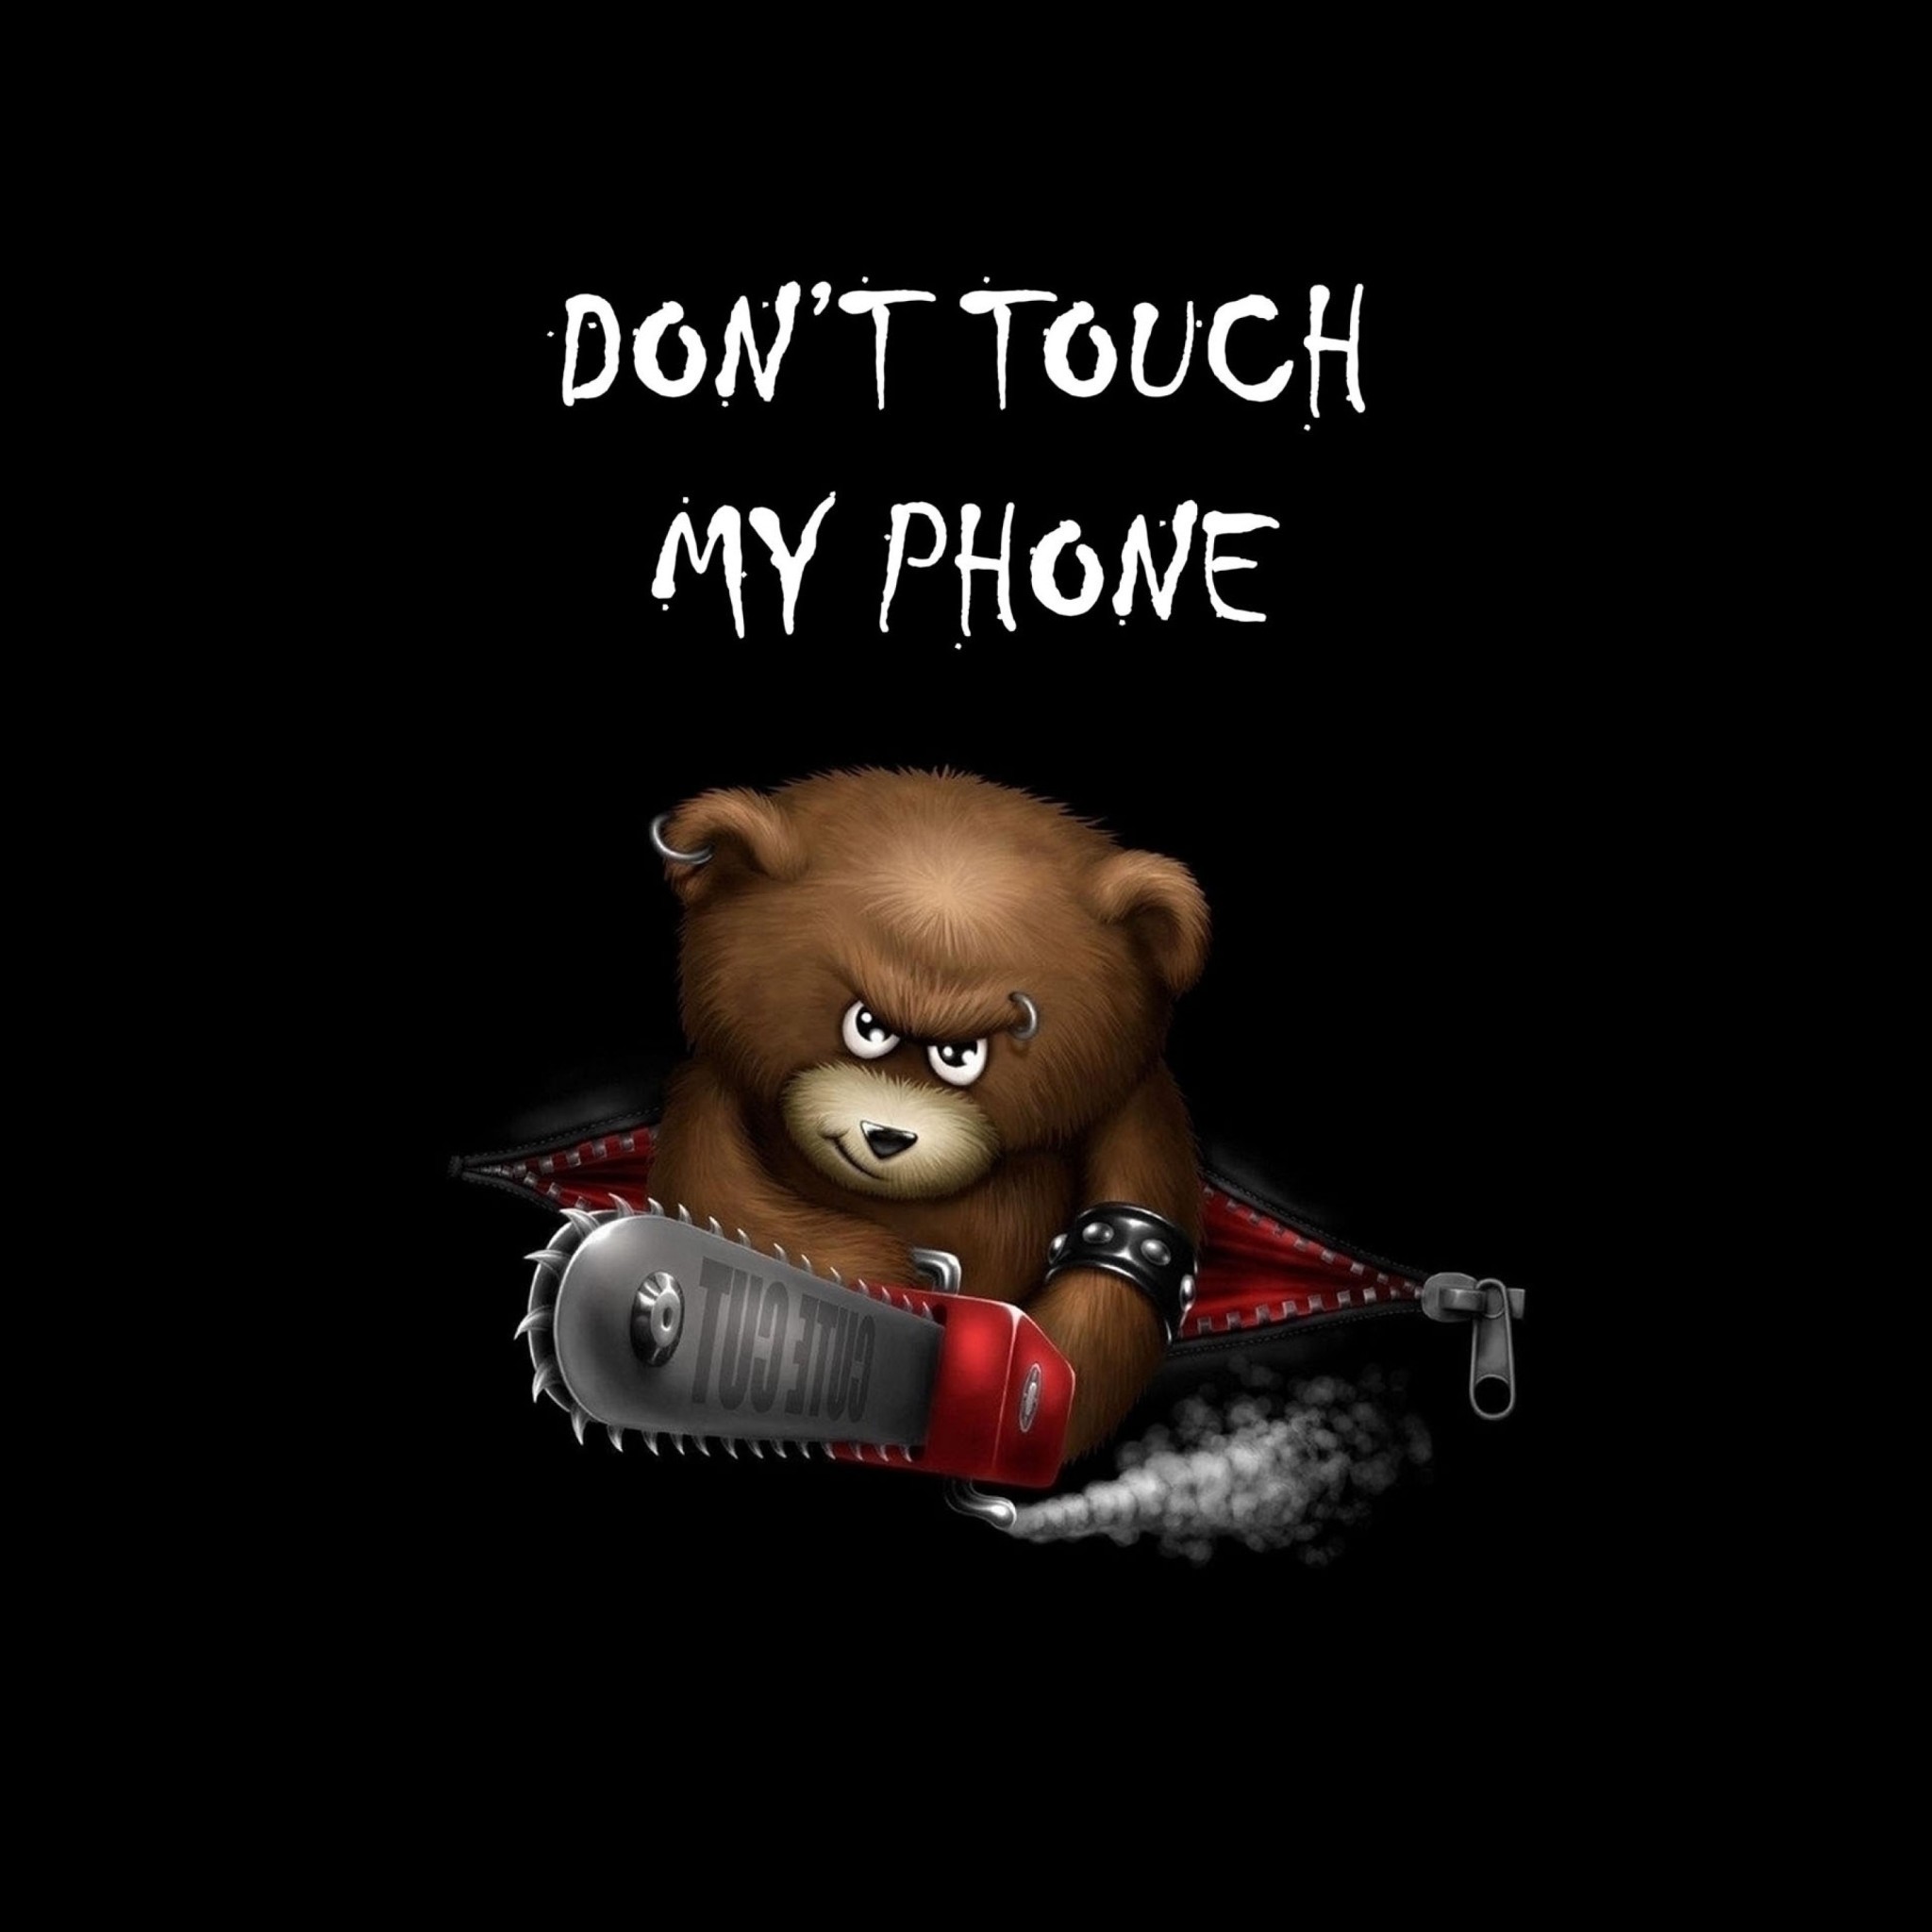 Don't Touch My Phone Wallpaper - 25 Super Cute Backgrounds for iPhone